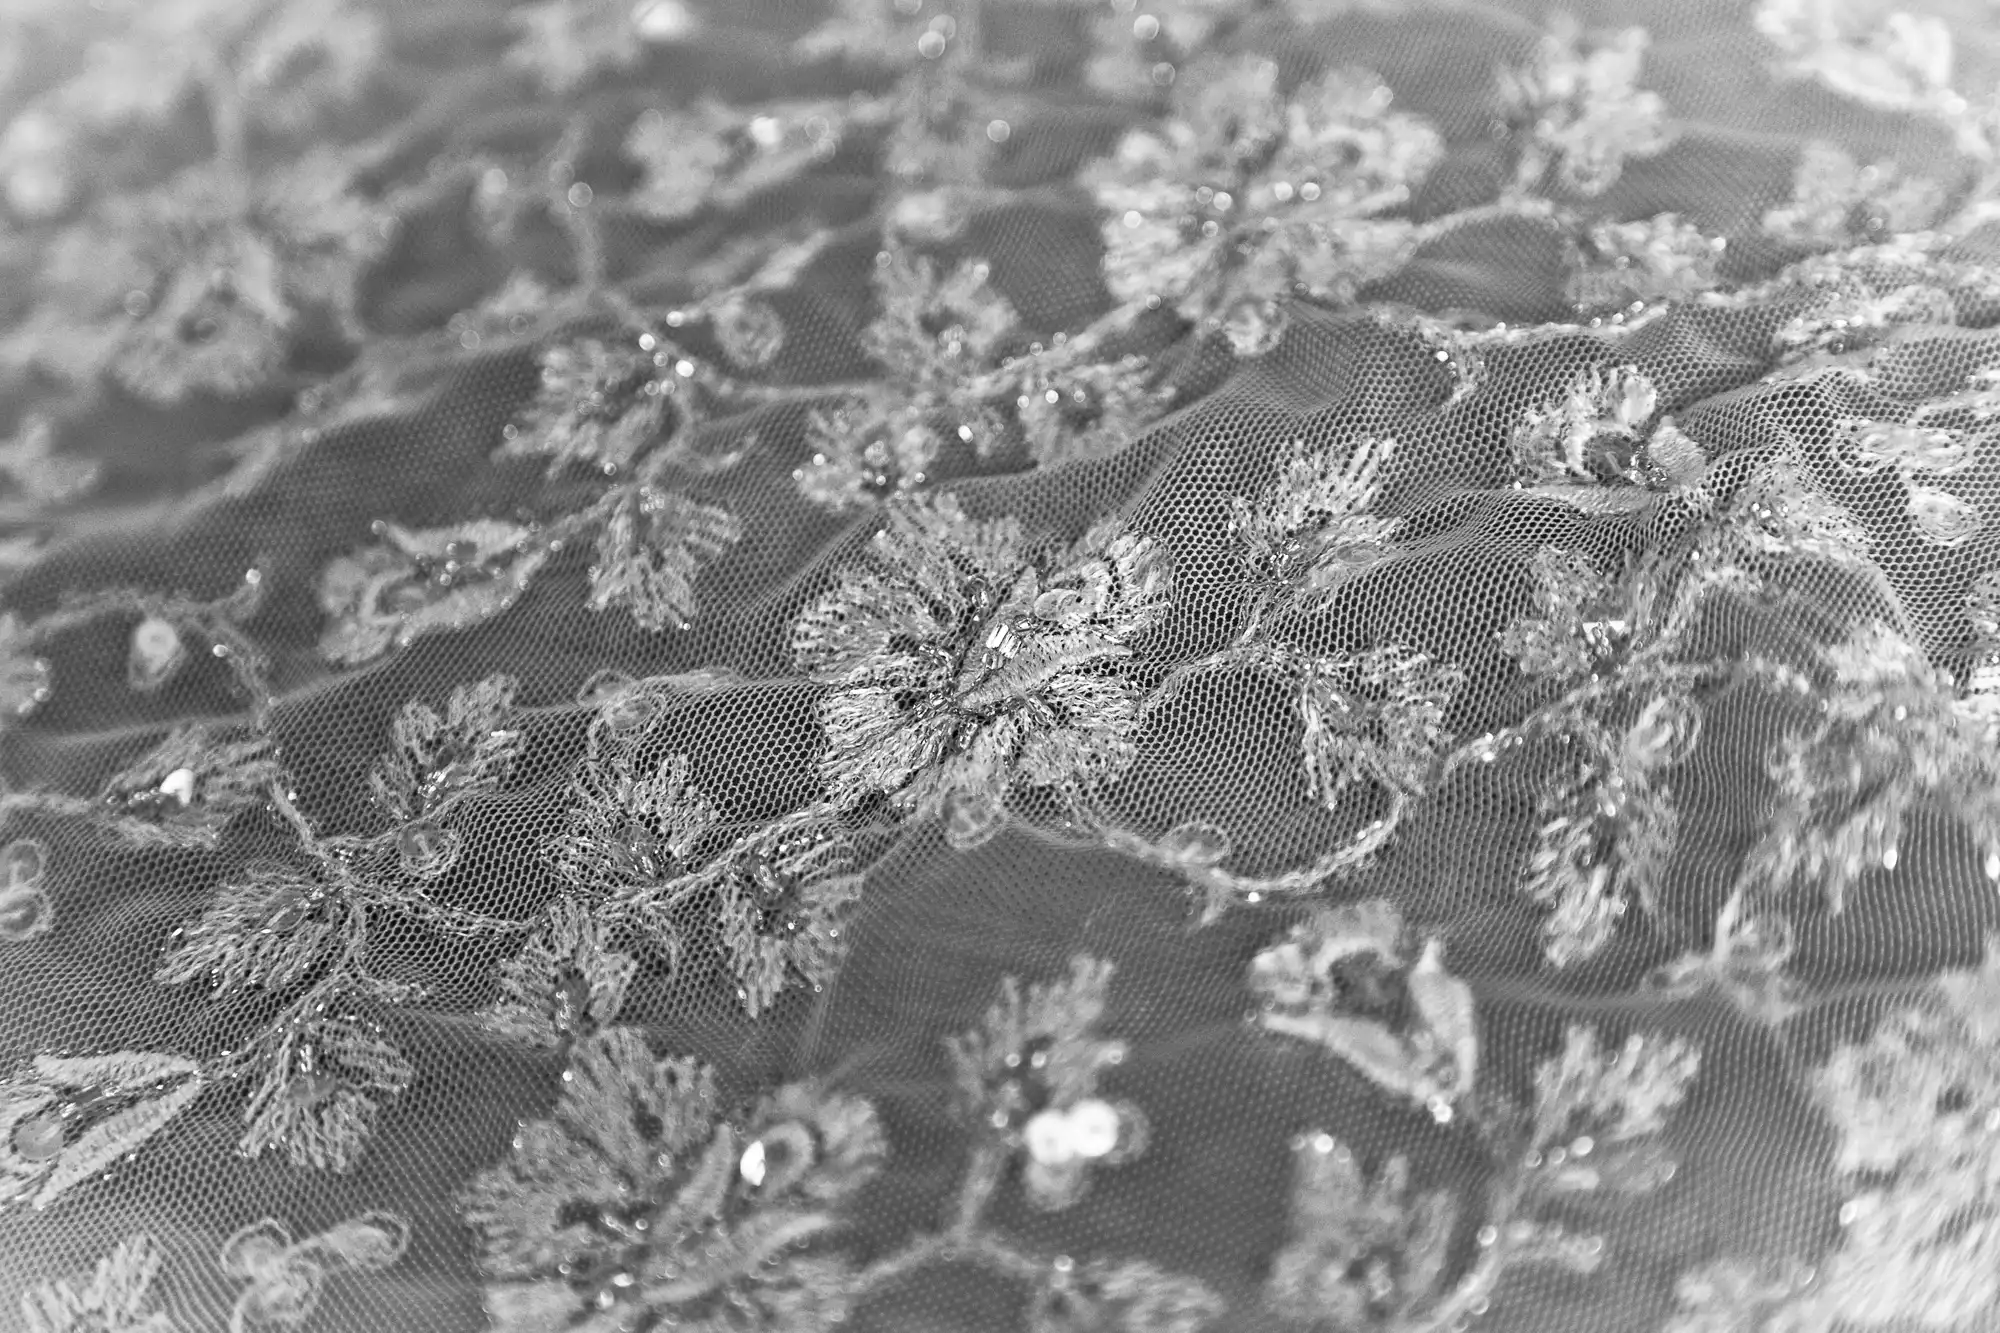 Close-up of a delicate lace fabric with intricate floral embroidery and beadwork in grayscale.